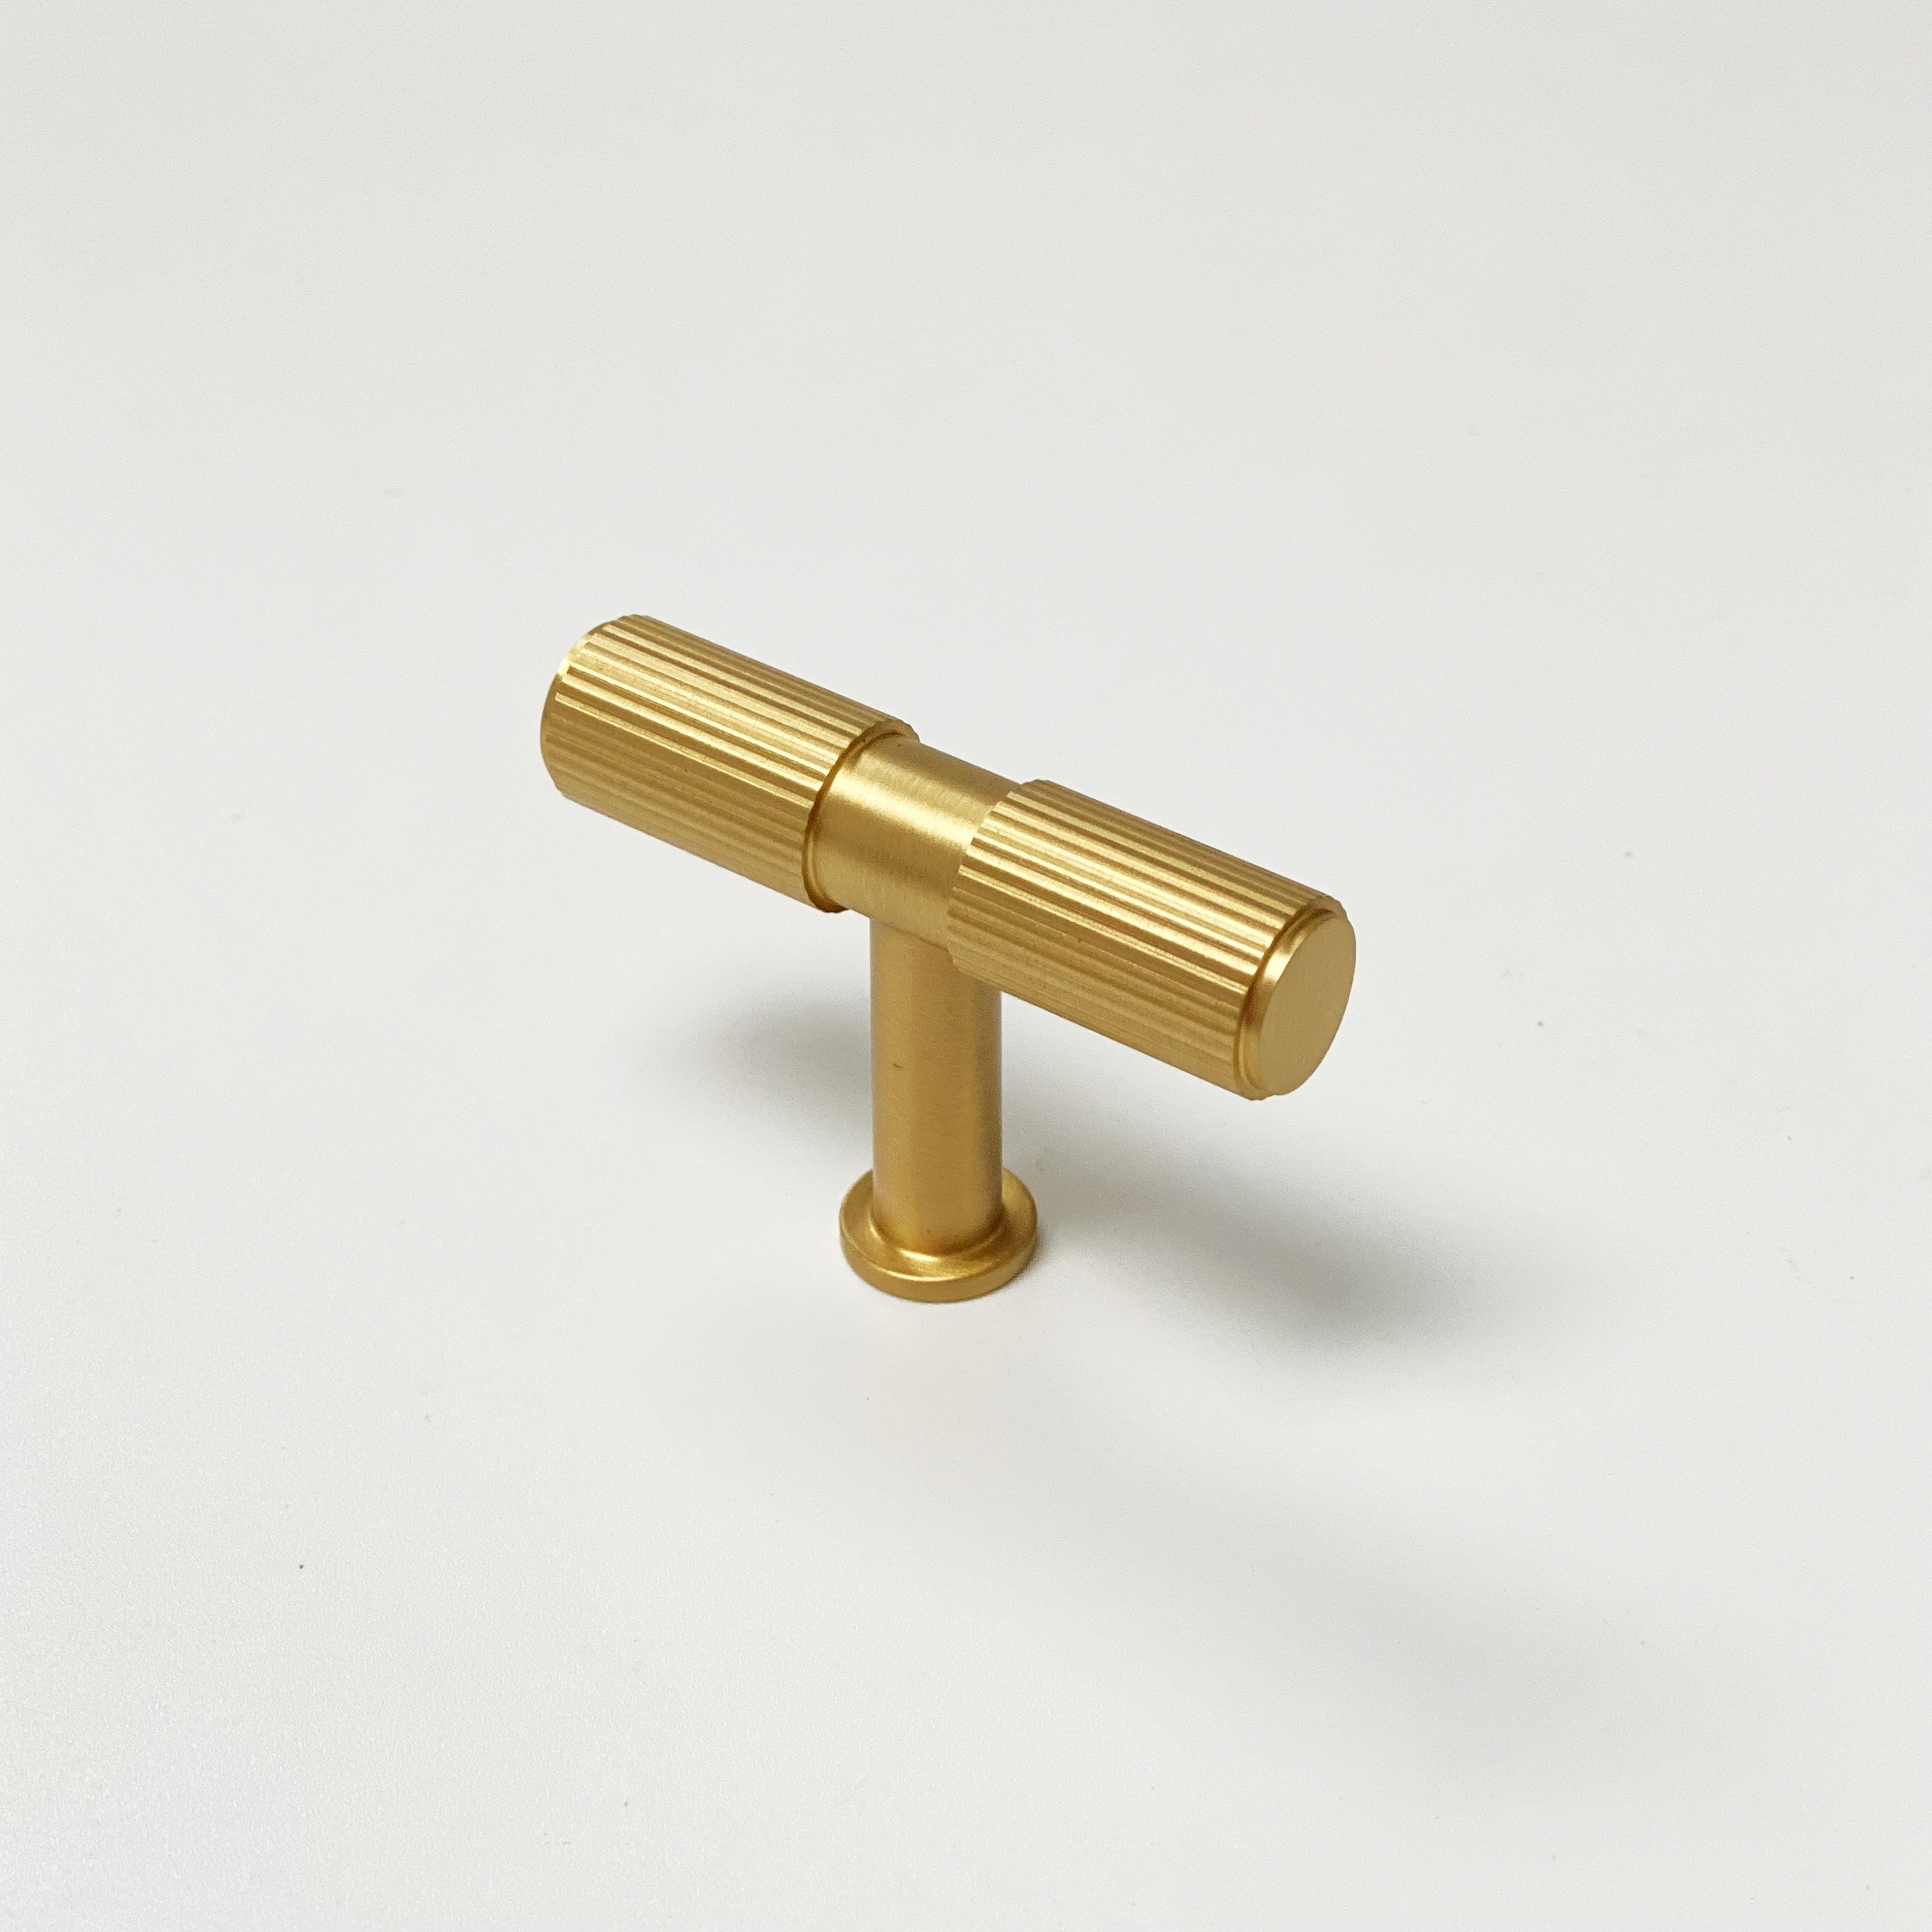 Brass Solid Texture No.2 Knurled Drawer Pulls and Knobs in Satin Bra